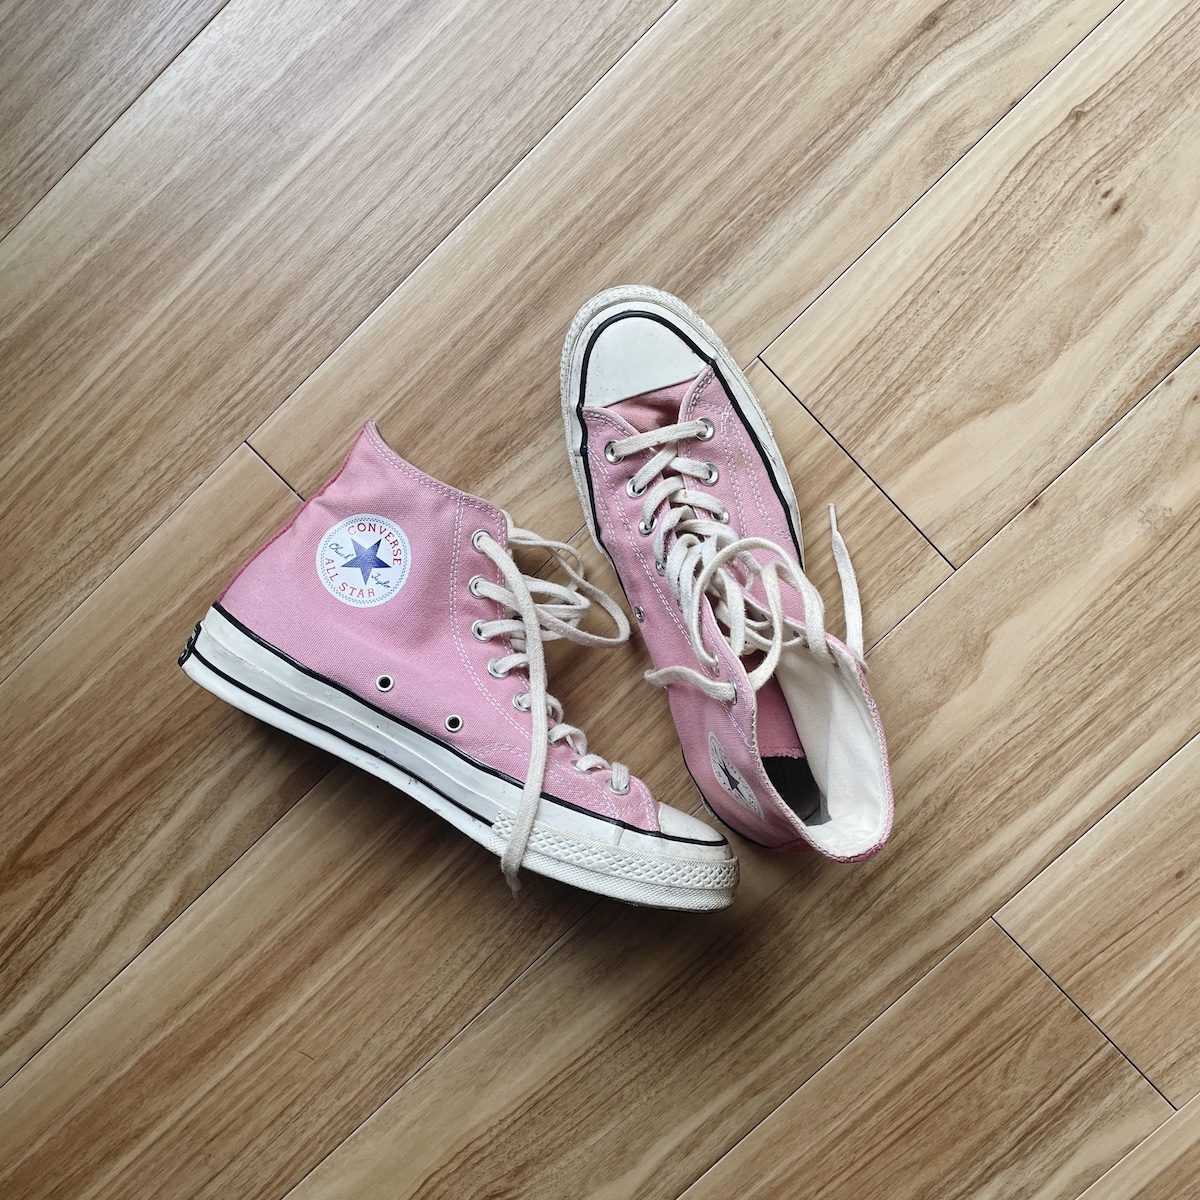 〈CONVERSE〉 ALL STAR MADE IN USA